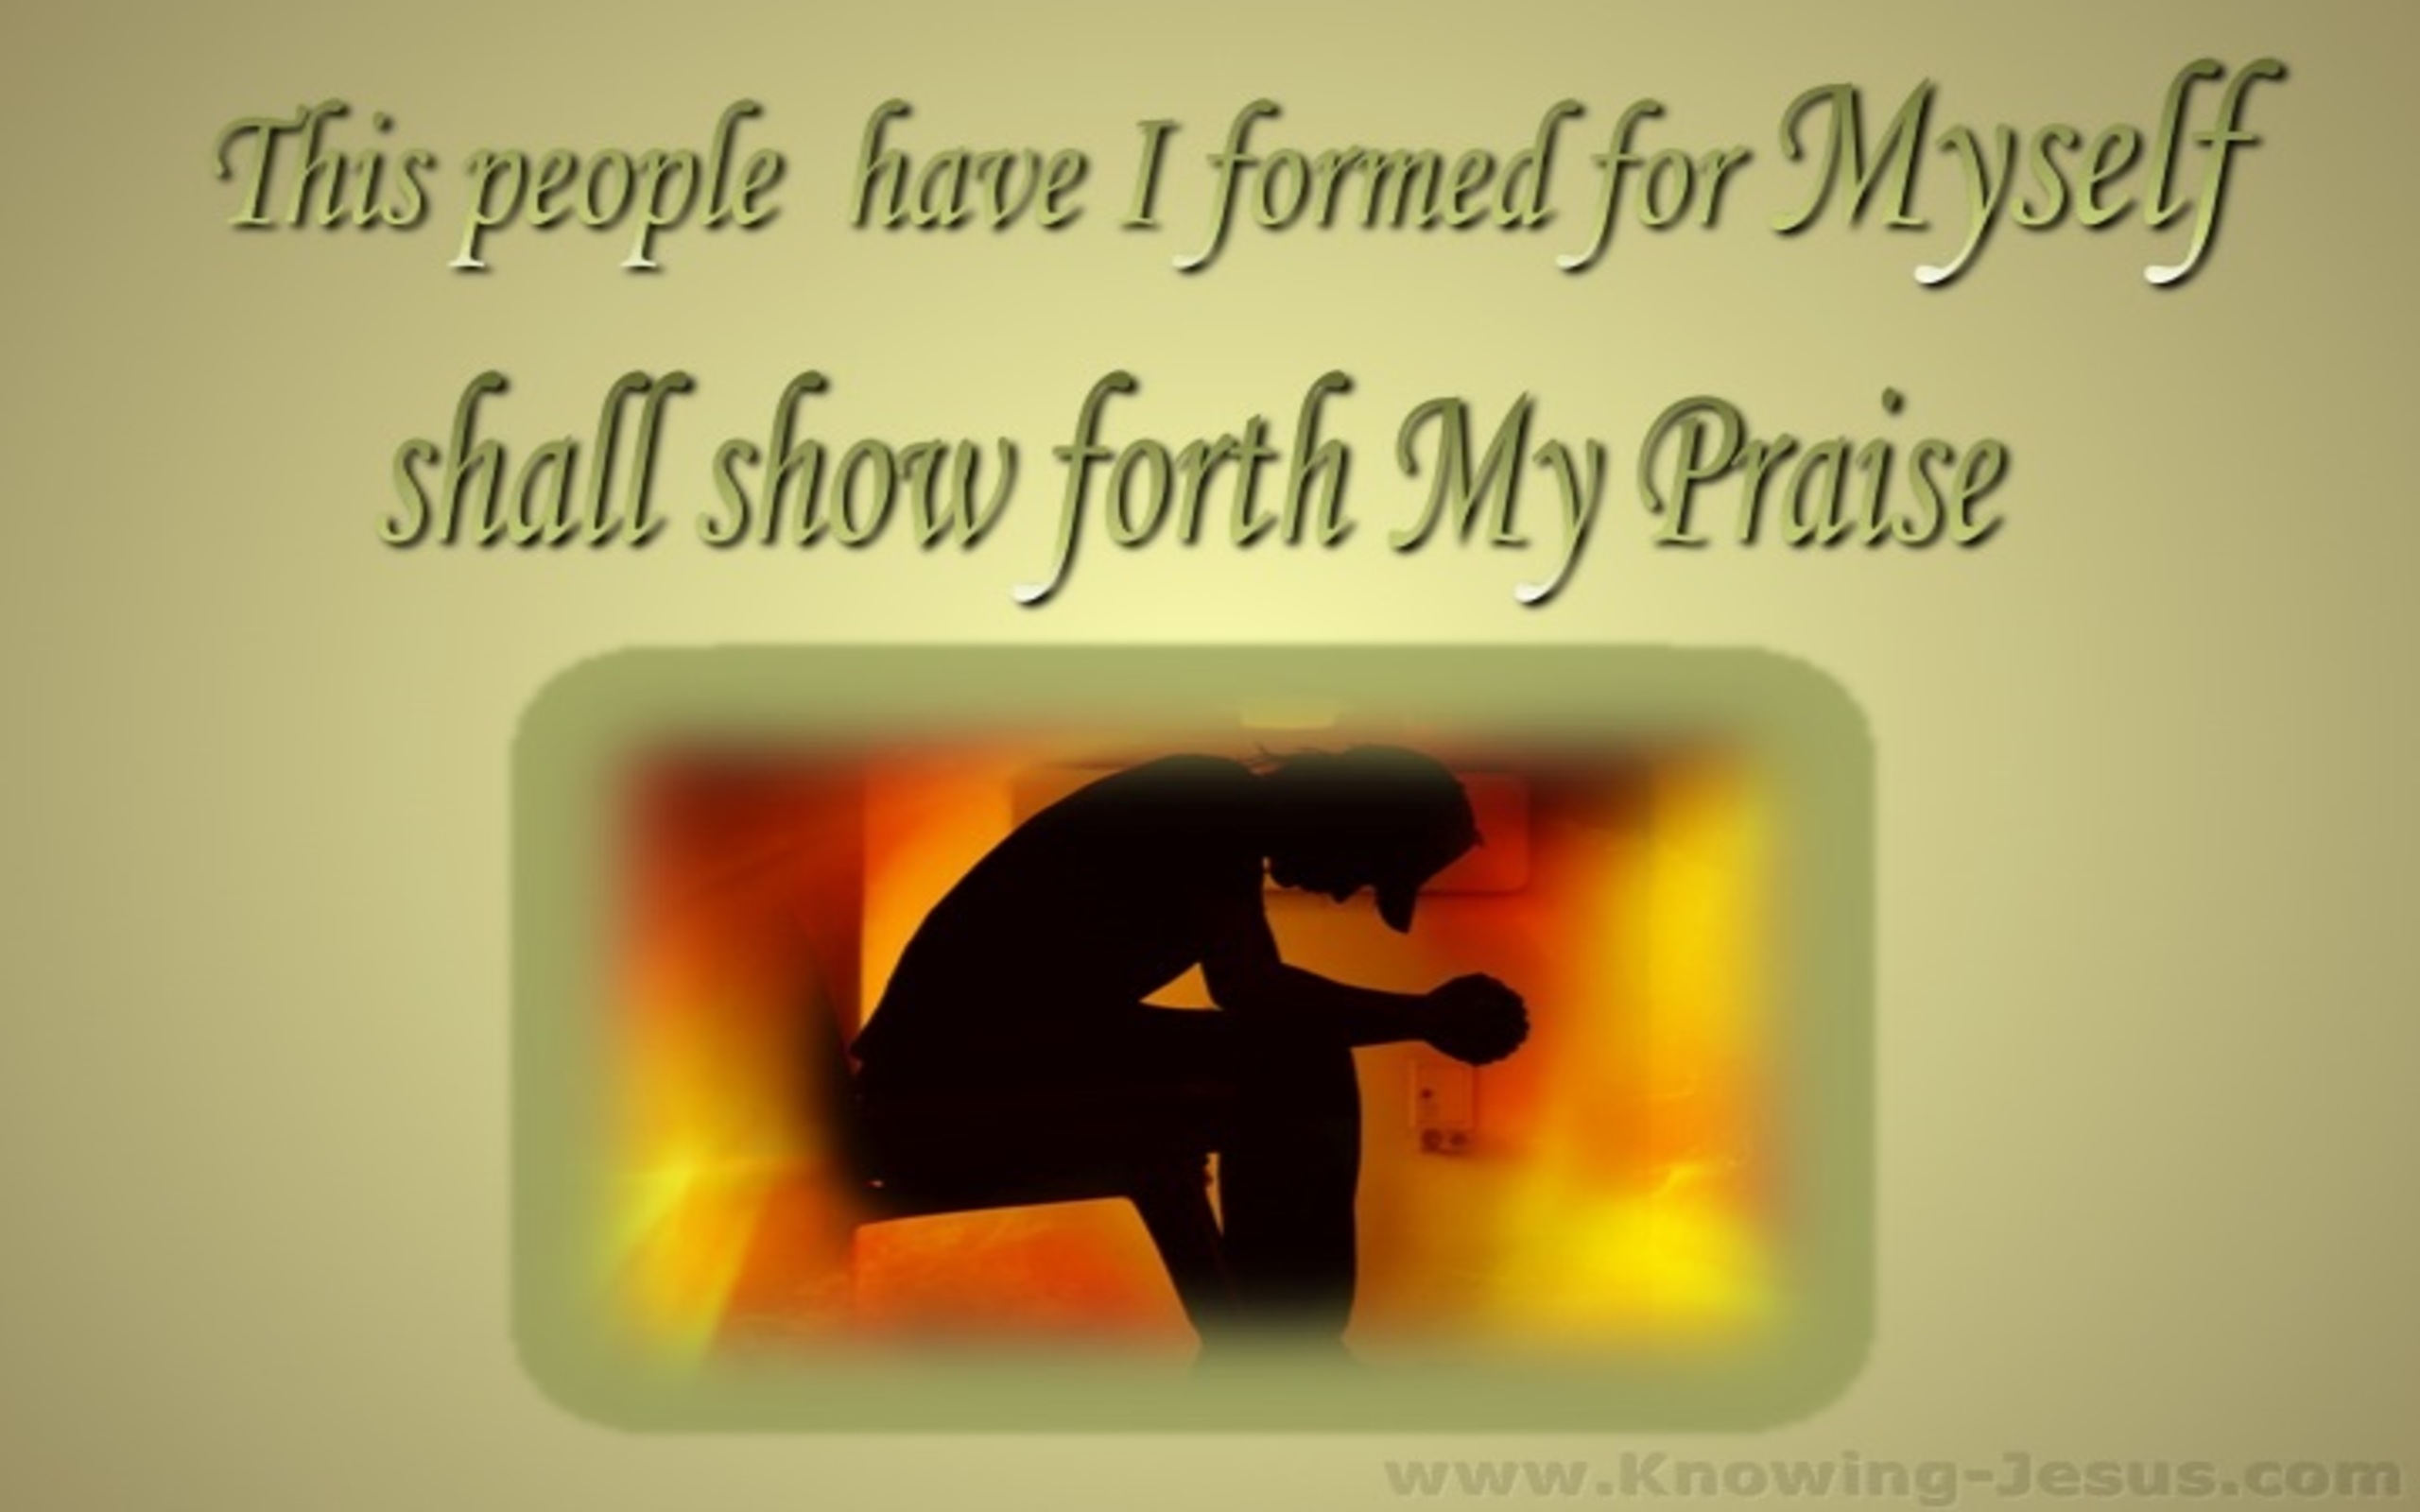 Isaiah 43:21 They Shall Show Forth My Praise (sage)